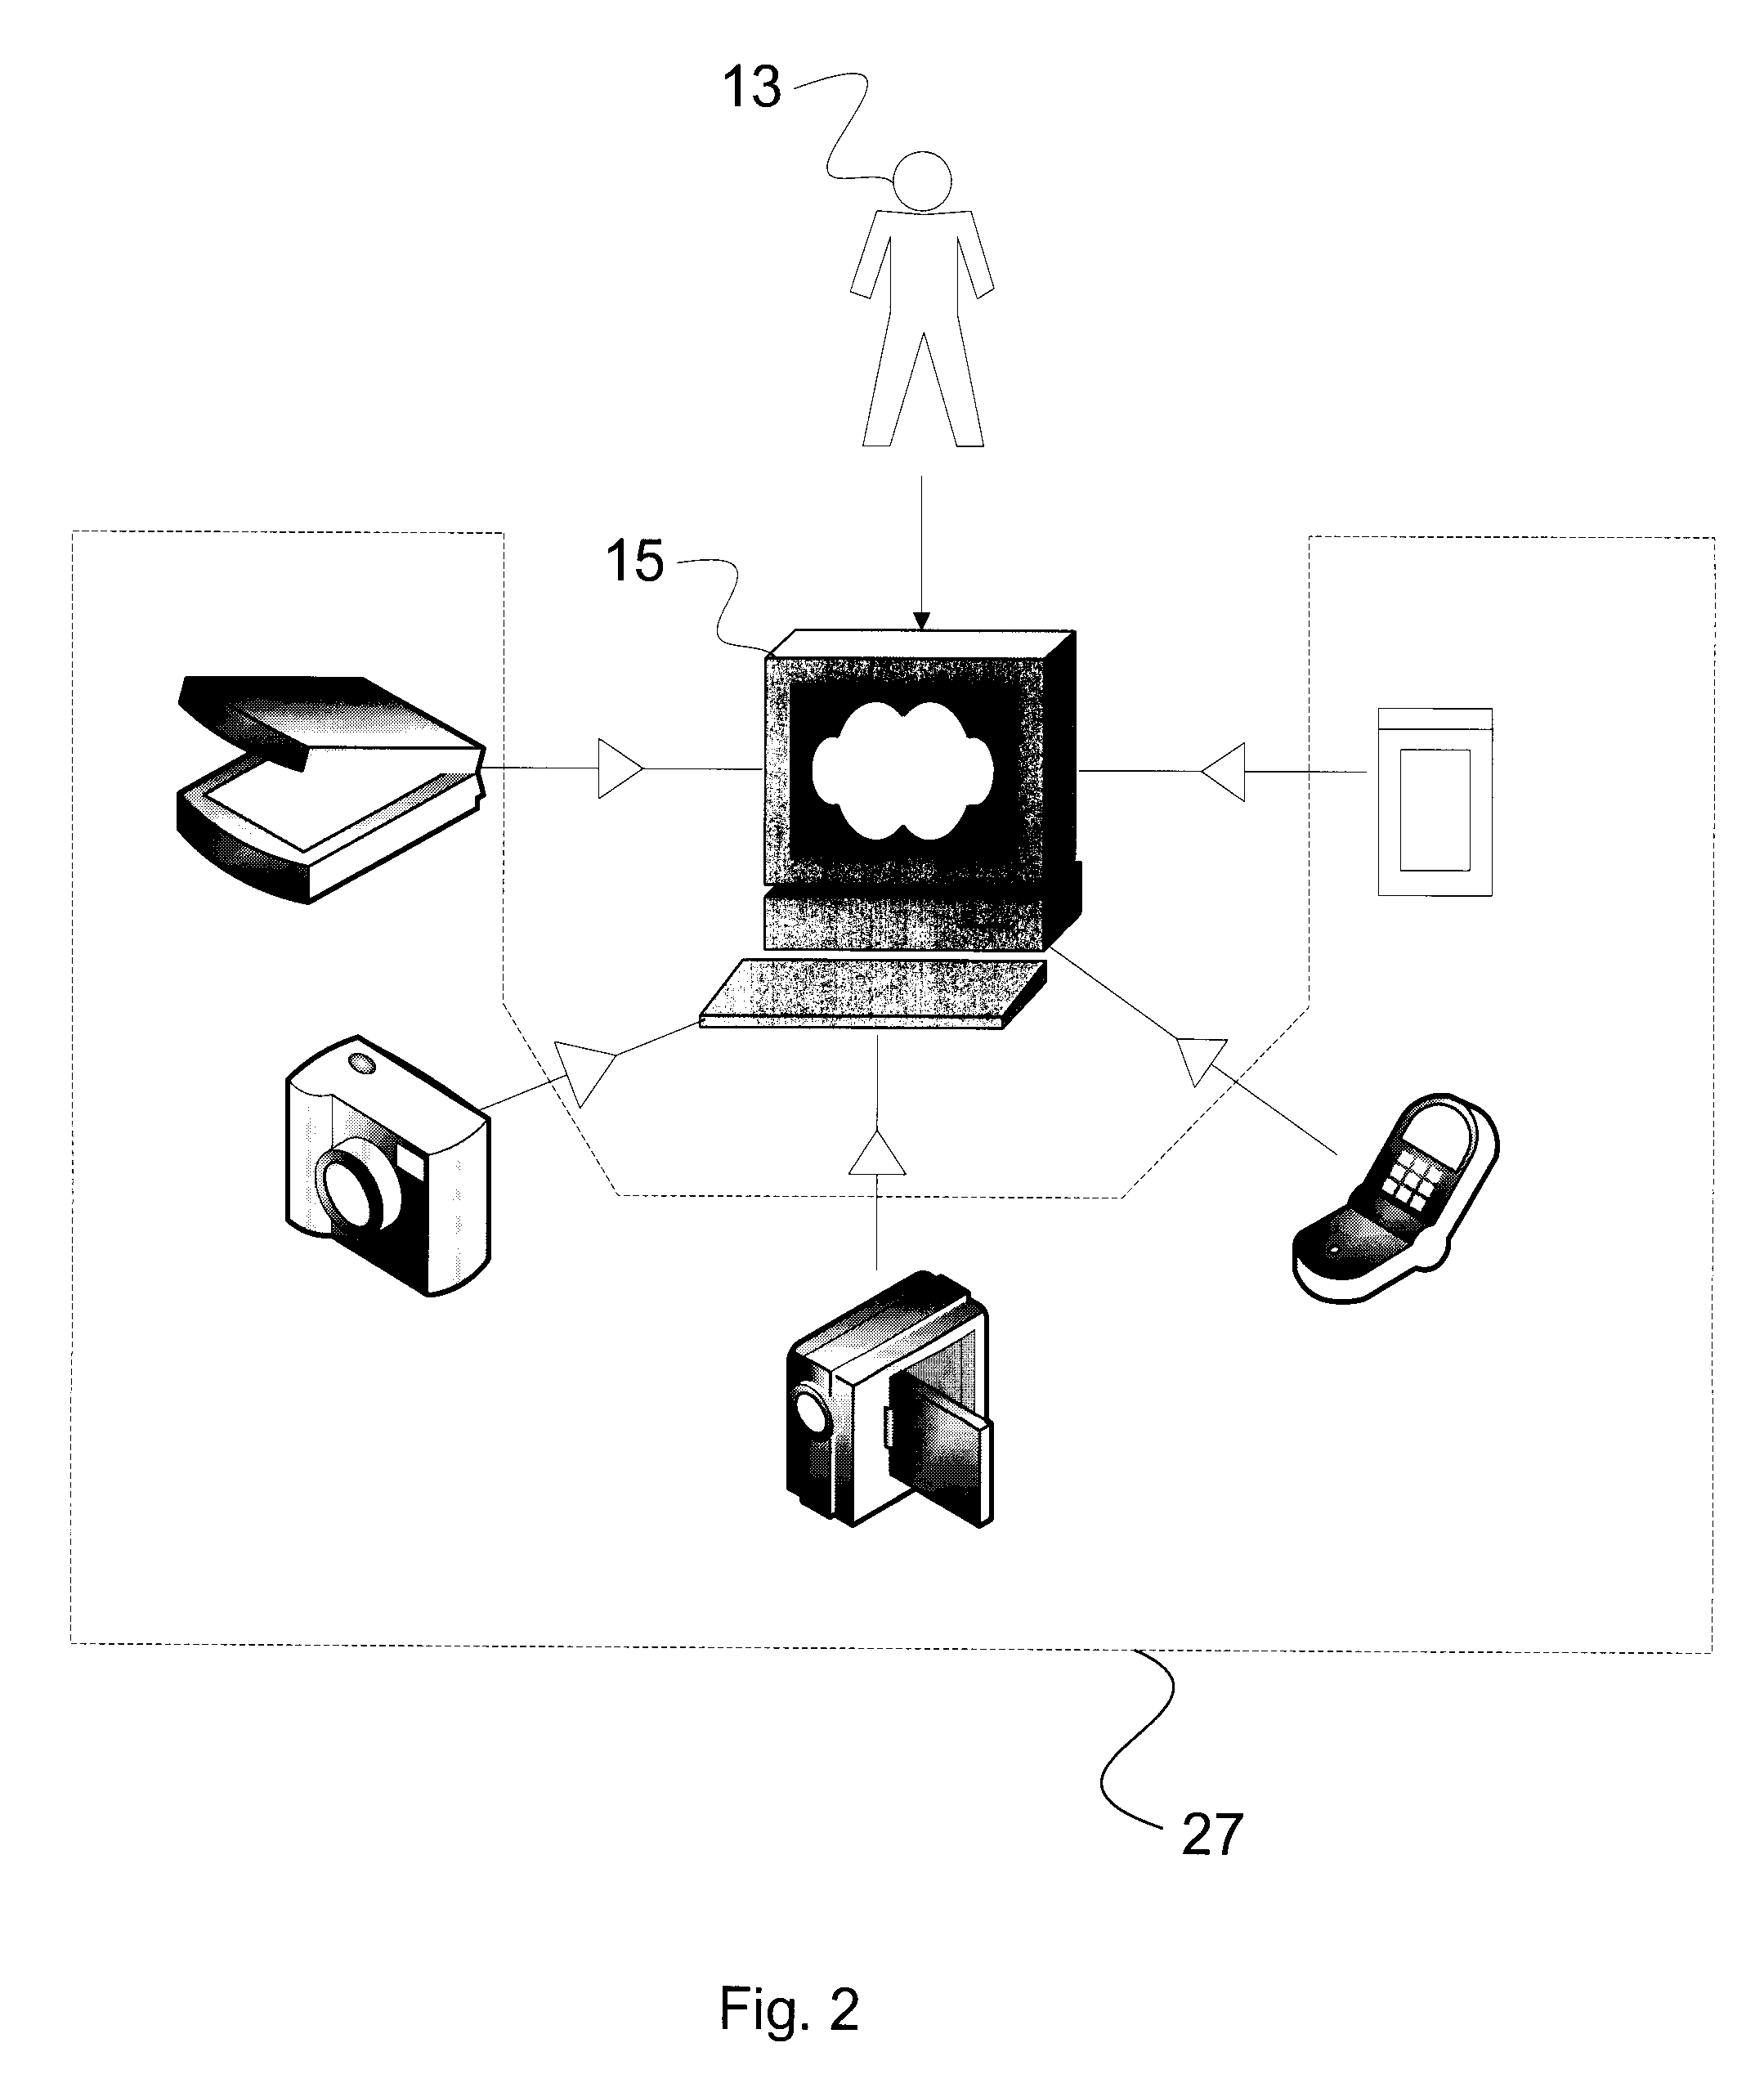 Method, system, and computer program for identification and sharing of digital images with face signatures